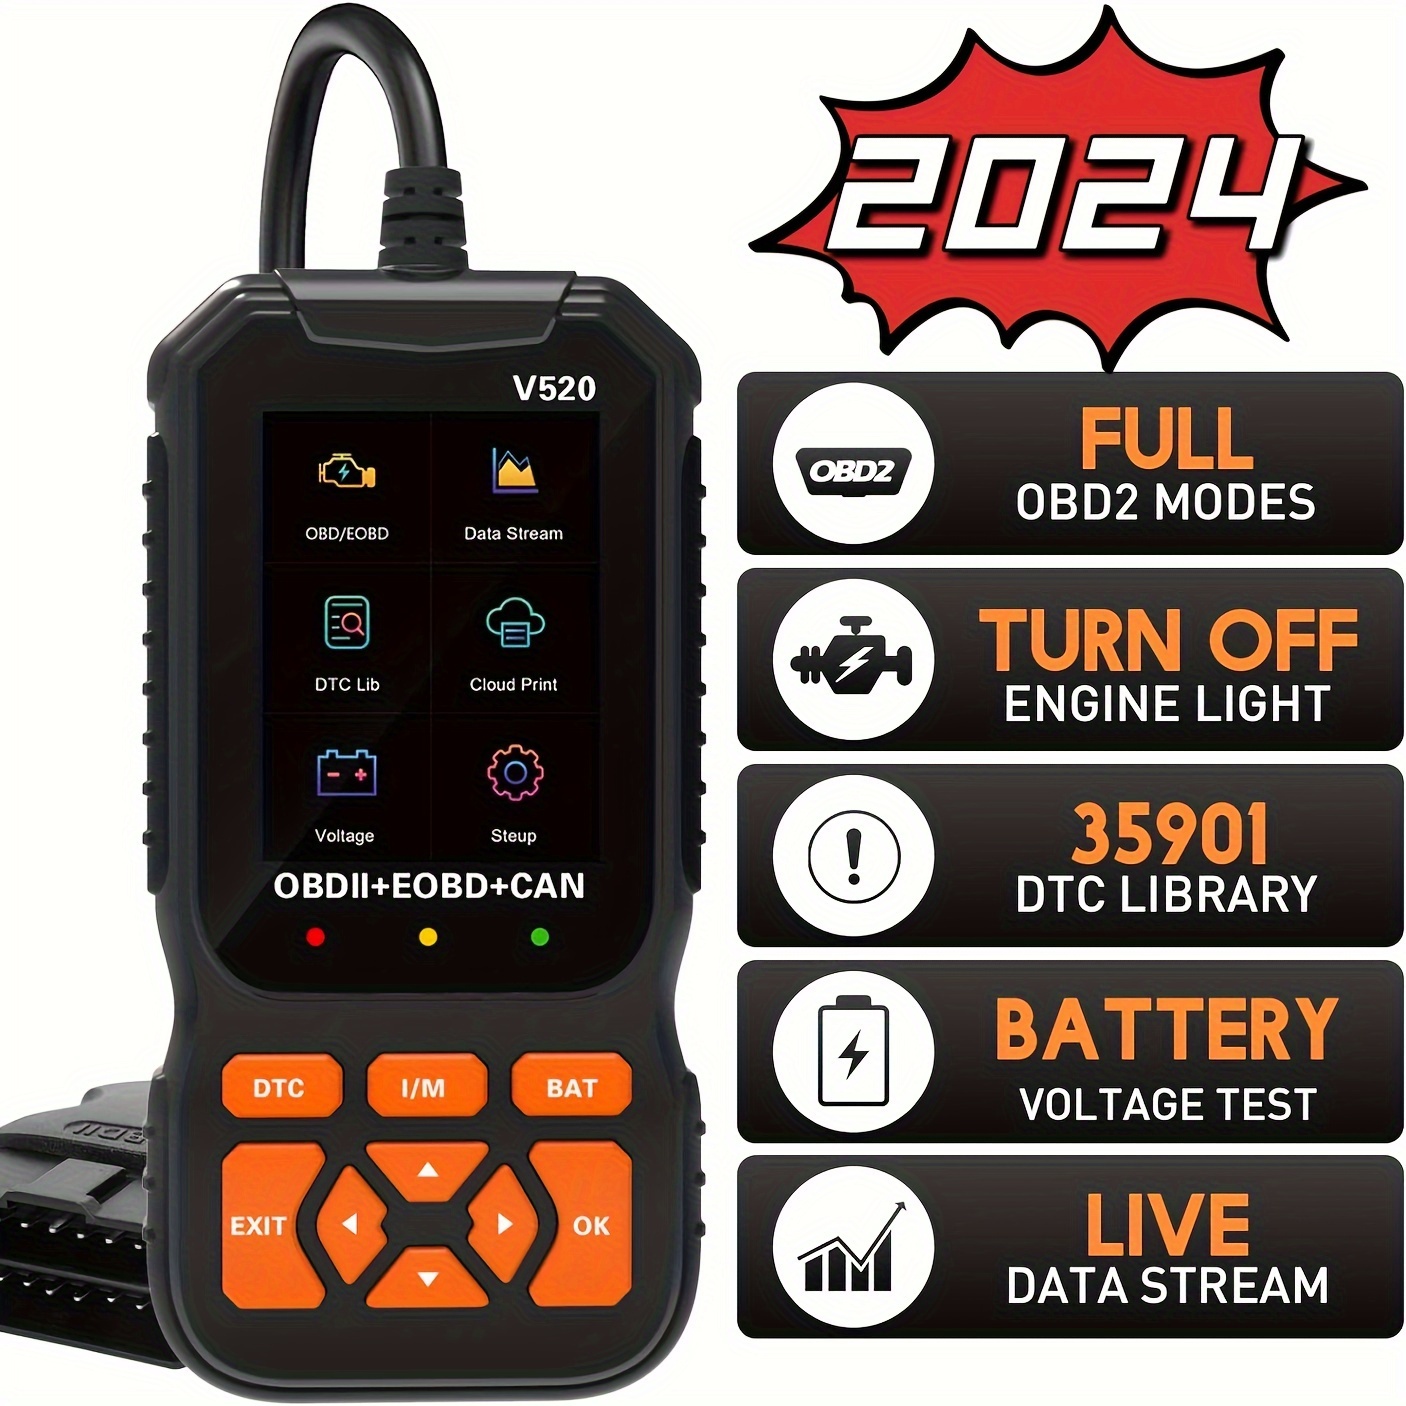 OBD2 Scanner Diagnostic Tool, Car Code Reader with Live Data/Freeze  Frame/I/M Readiness, YA206 Diagnostic Scan Tool for OBDII Protocol